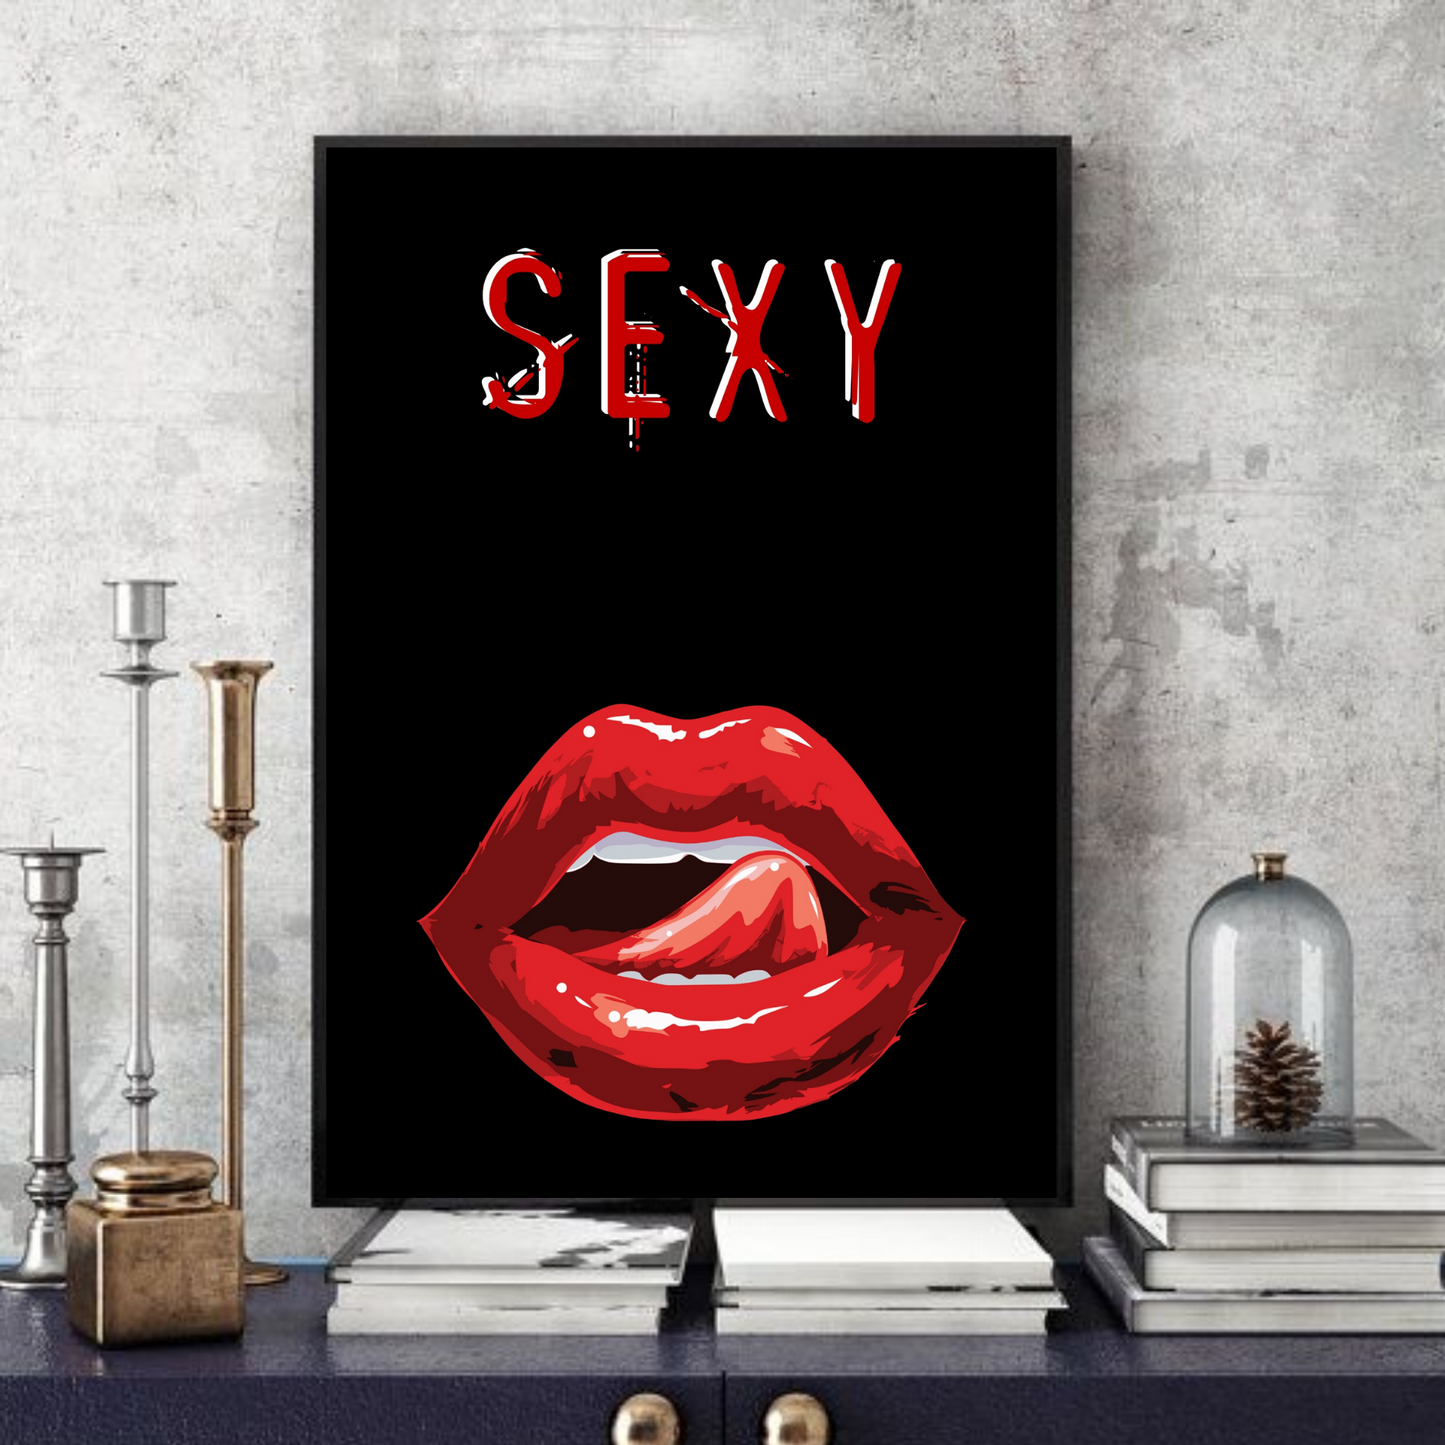 Sexy -  Typographic Wall Art